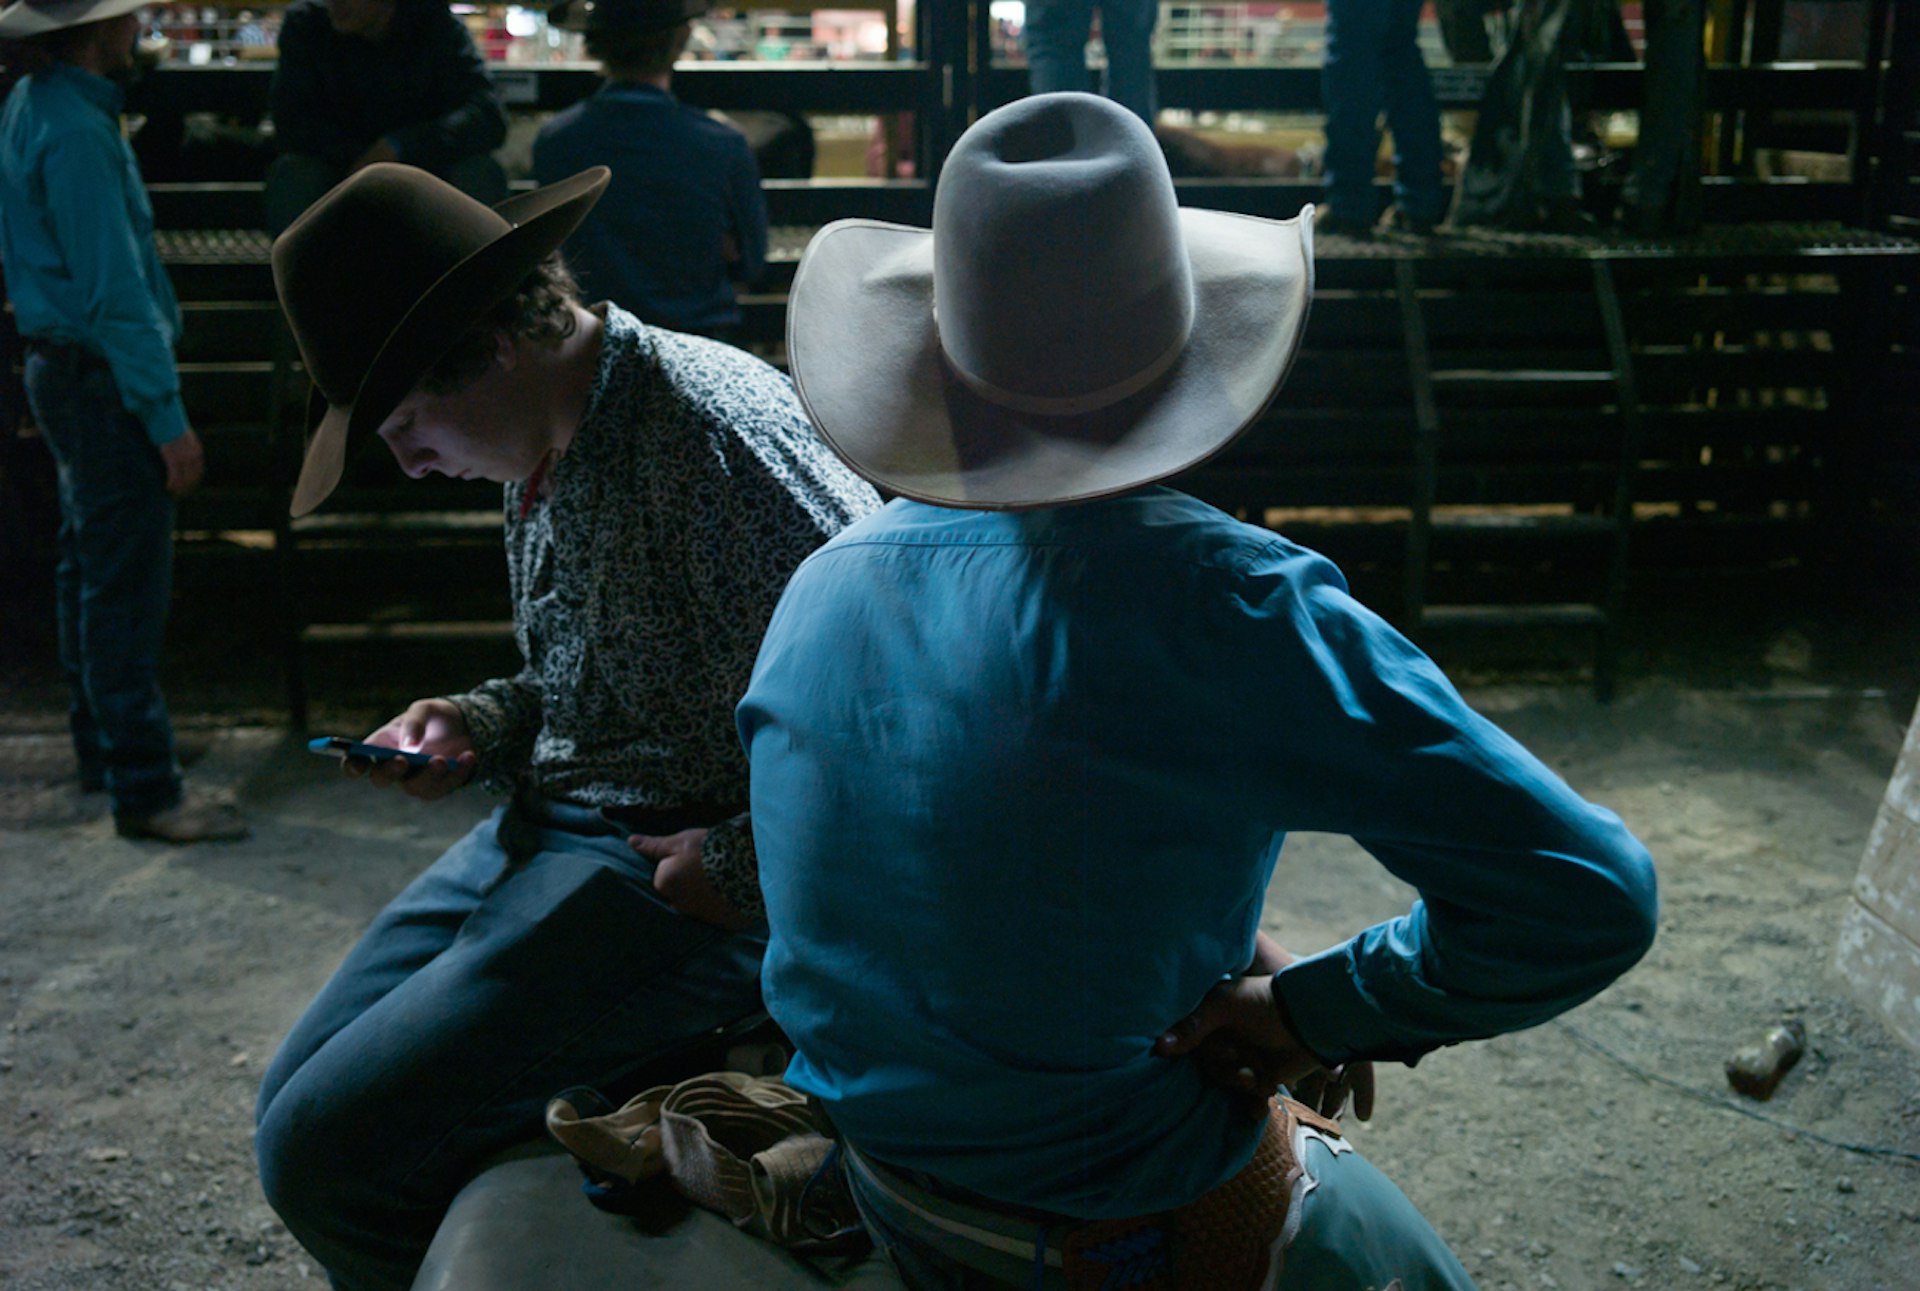 In Australia's cattle country the future of the rodeo remains unclear